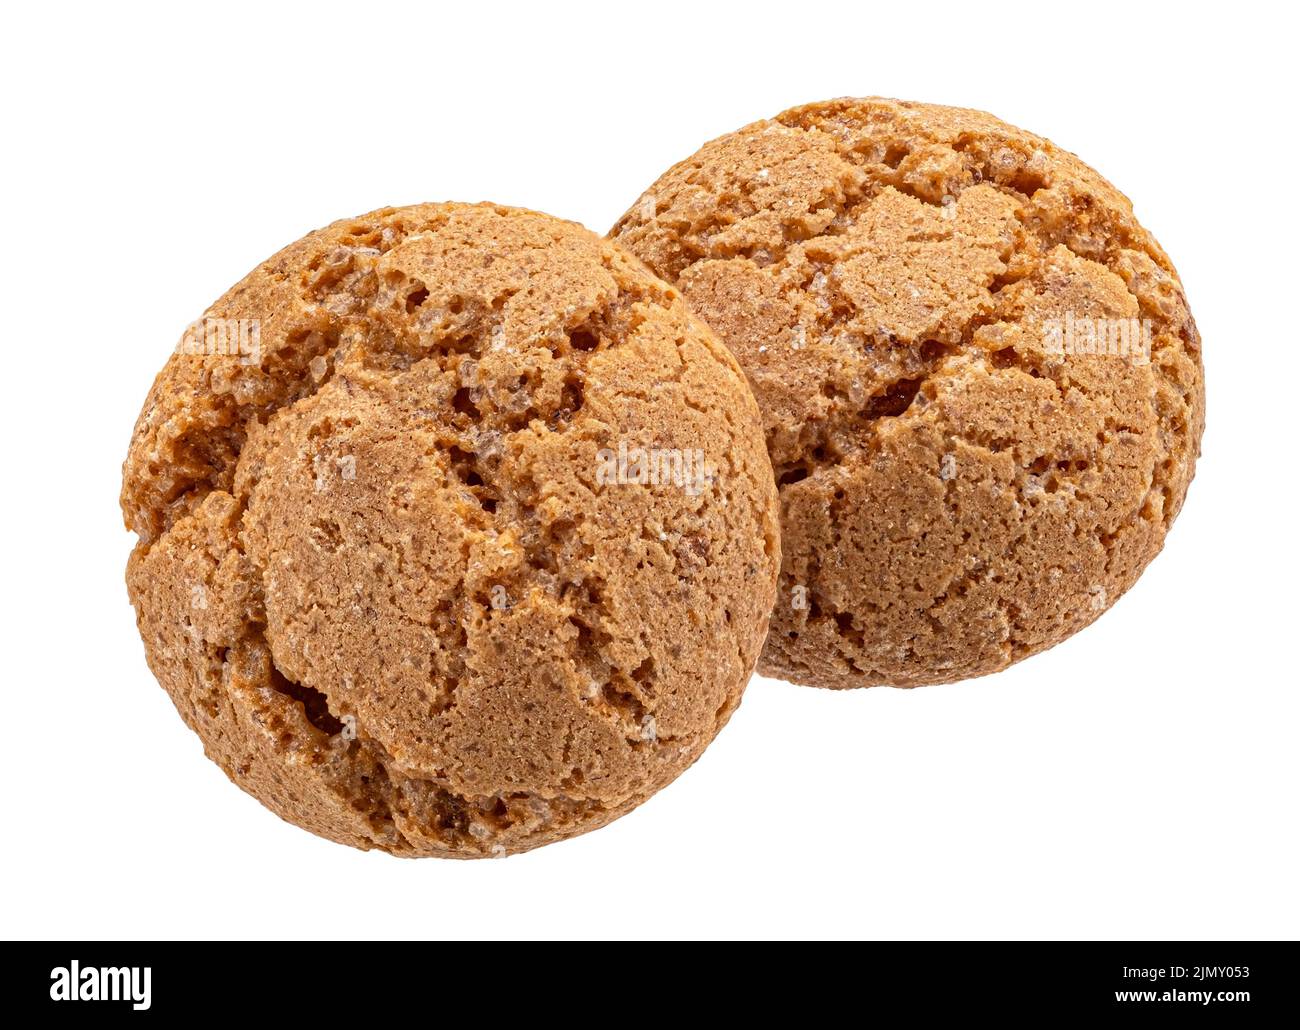 & Alamy Cut amaretti Pictures Out Stock - Images Italian cookies